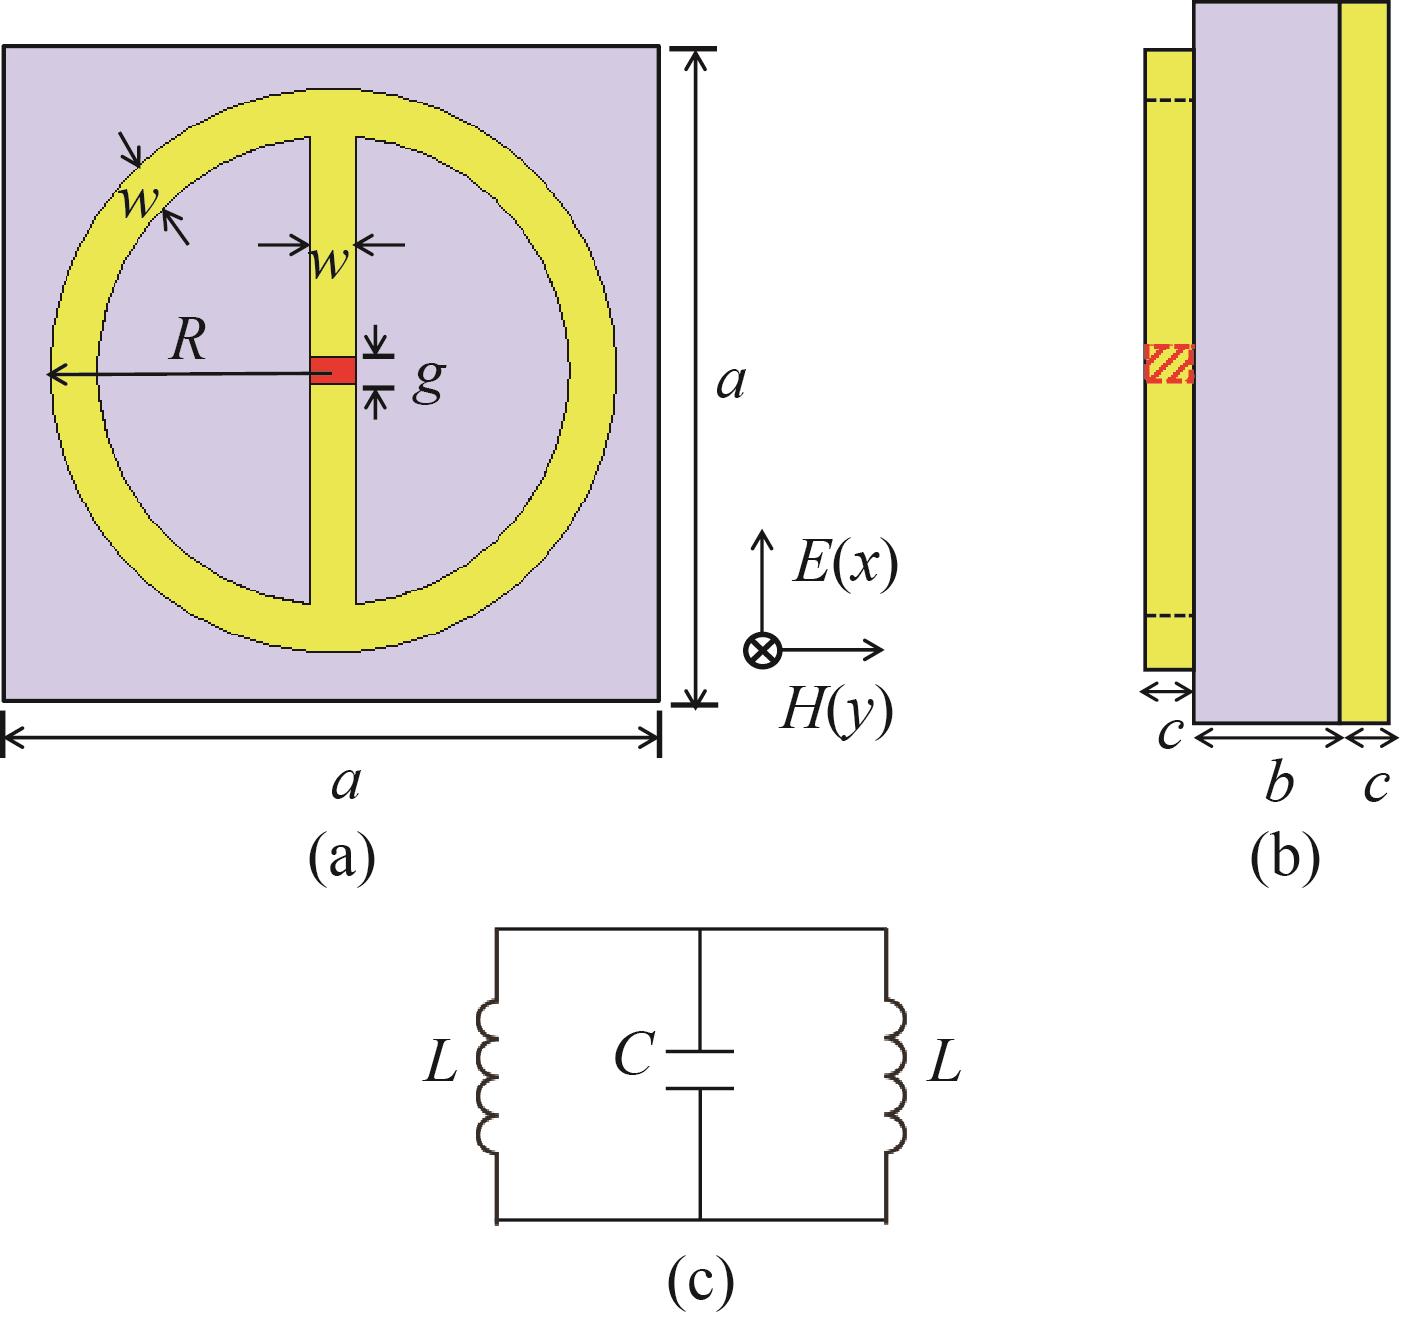 Structure diagram of metamaterial absorber （a）Absorber structural unit, （b） cell structure side view, （c）equivalent circuit diagram of metamaterial resonator